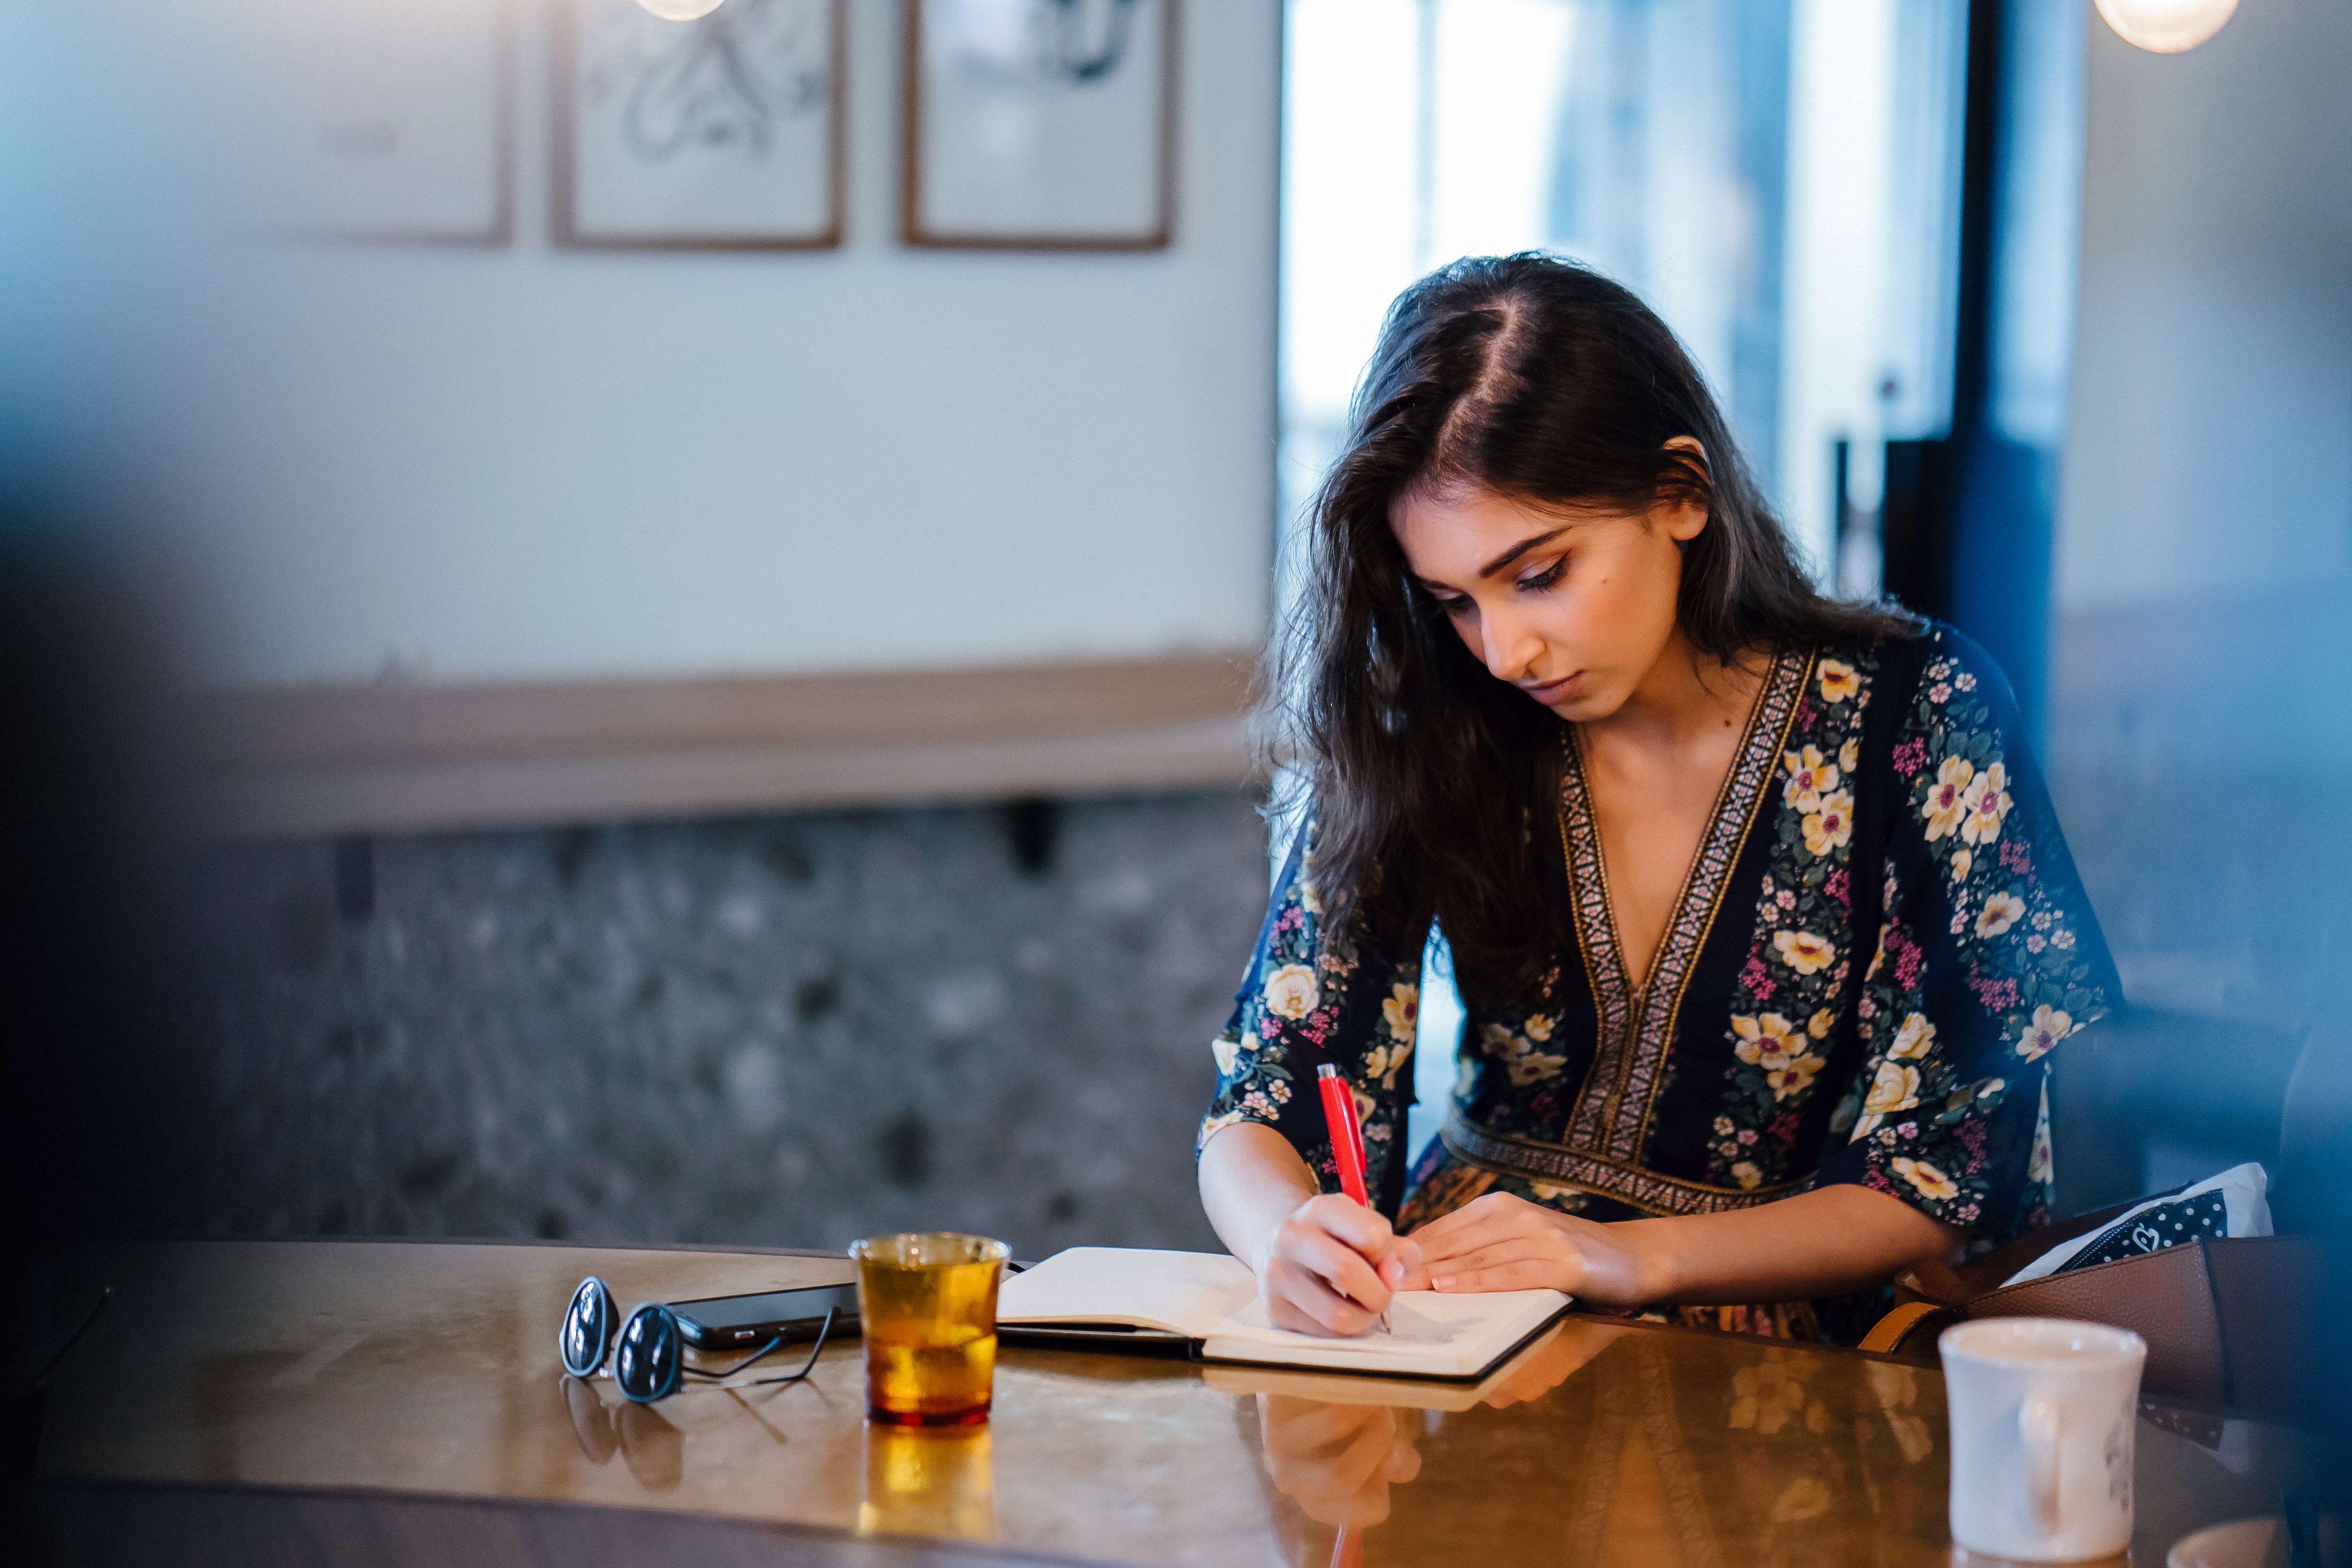 Writing in a journal regularly can help clarify your thoughts. (Shutterstock)